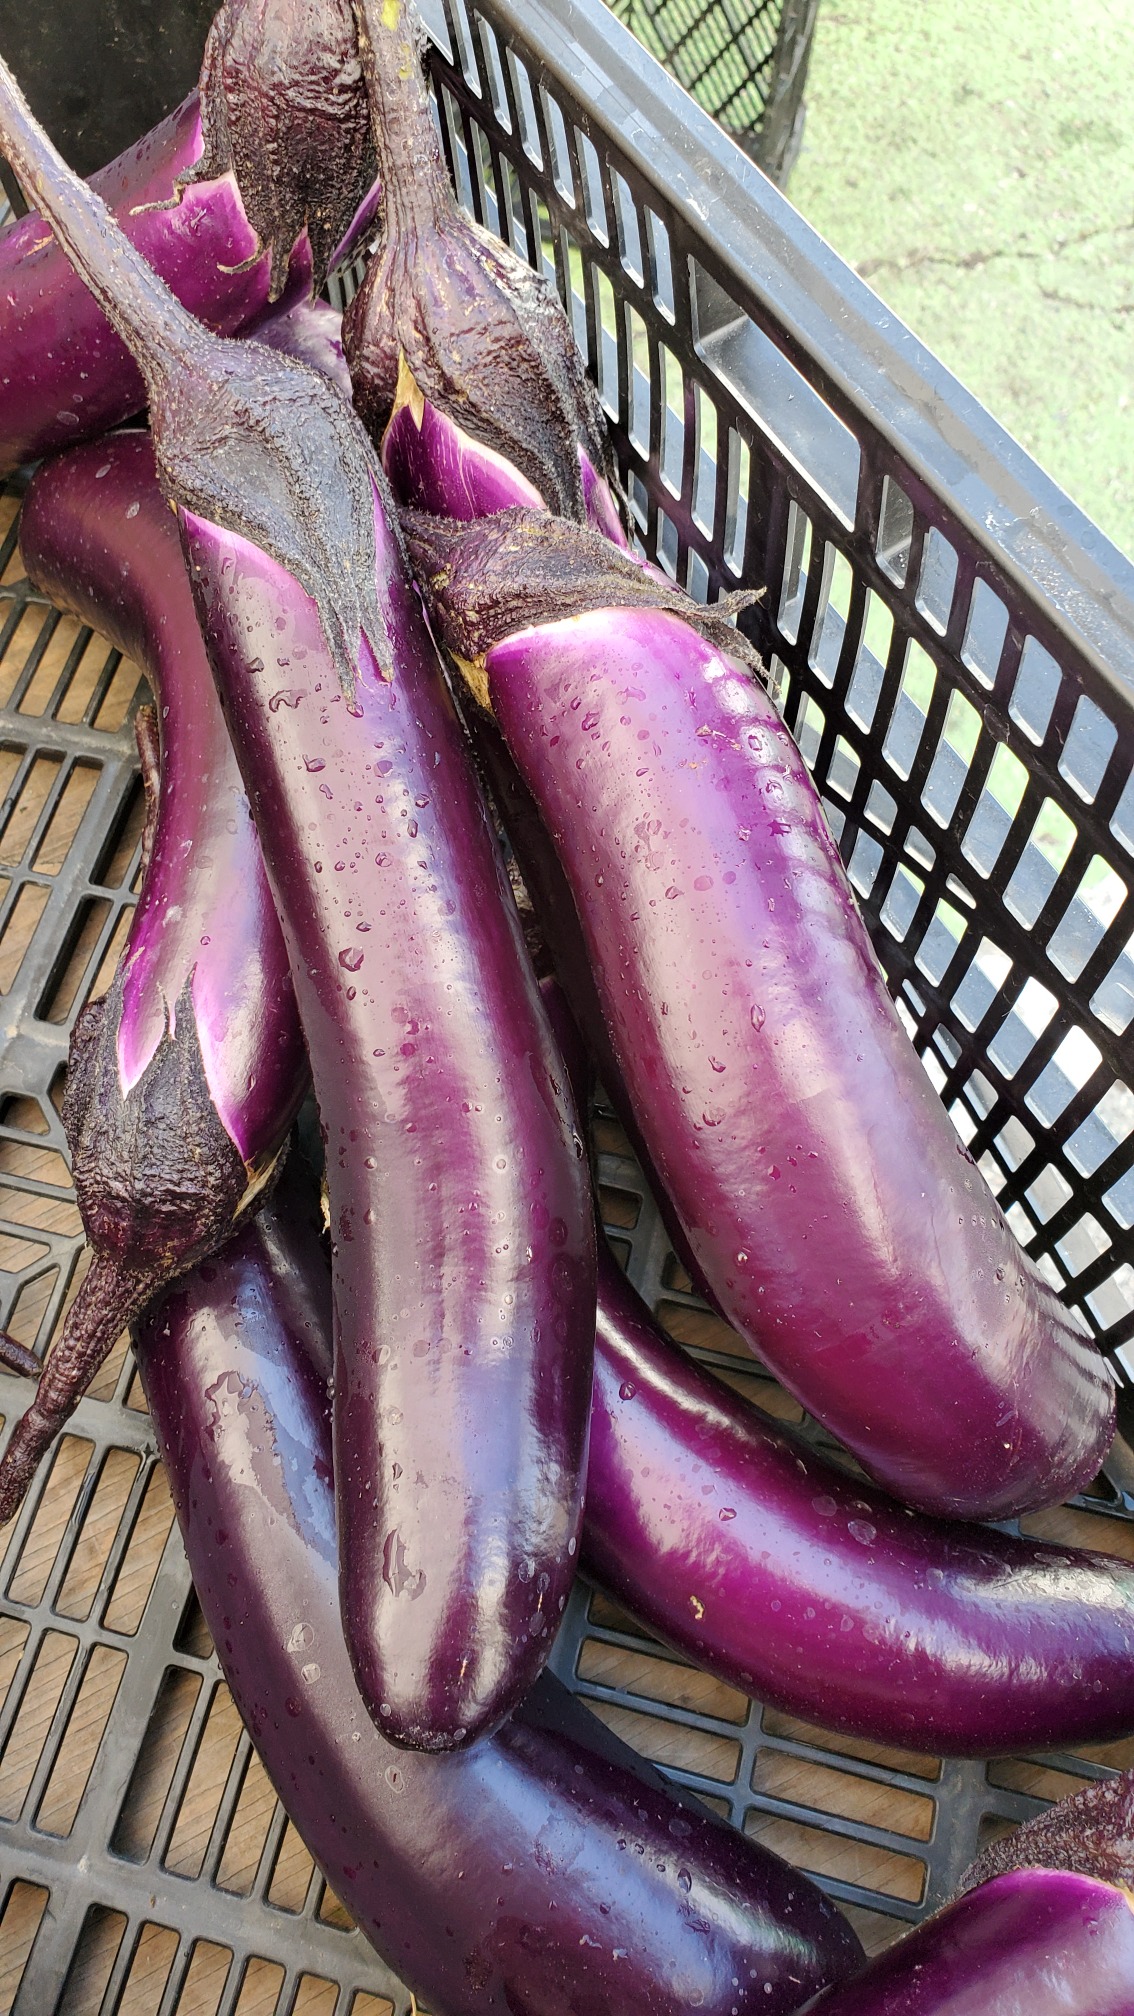 Chinese Eggplant Information Recipes And Facts,Honeycomb Tripe Recipe